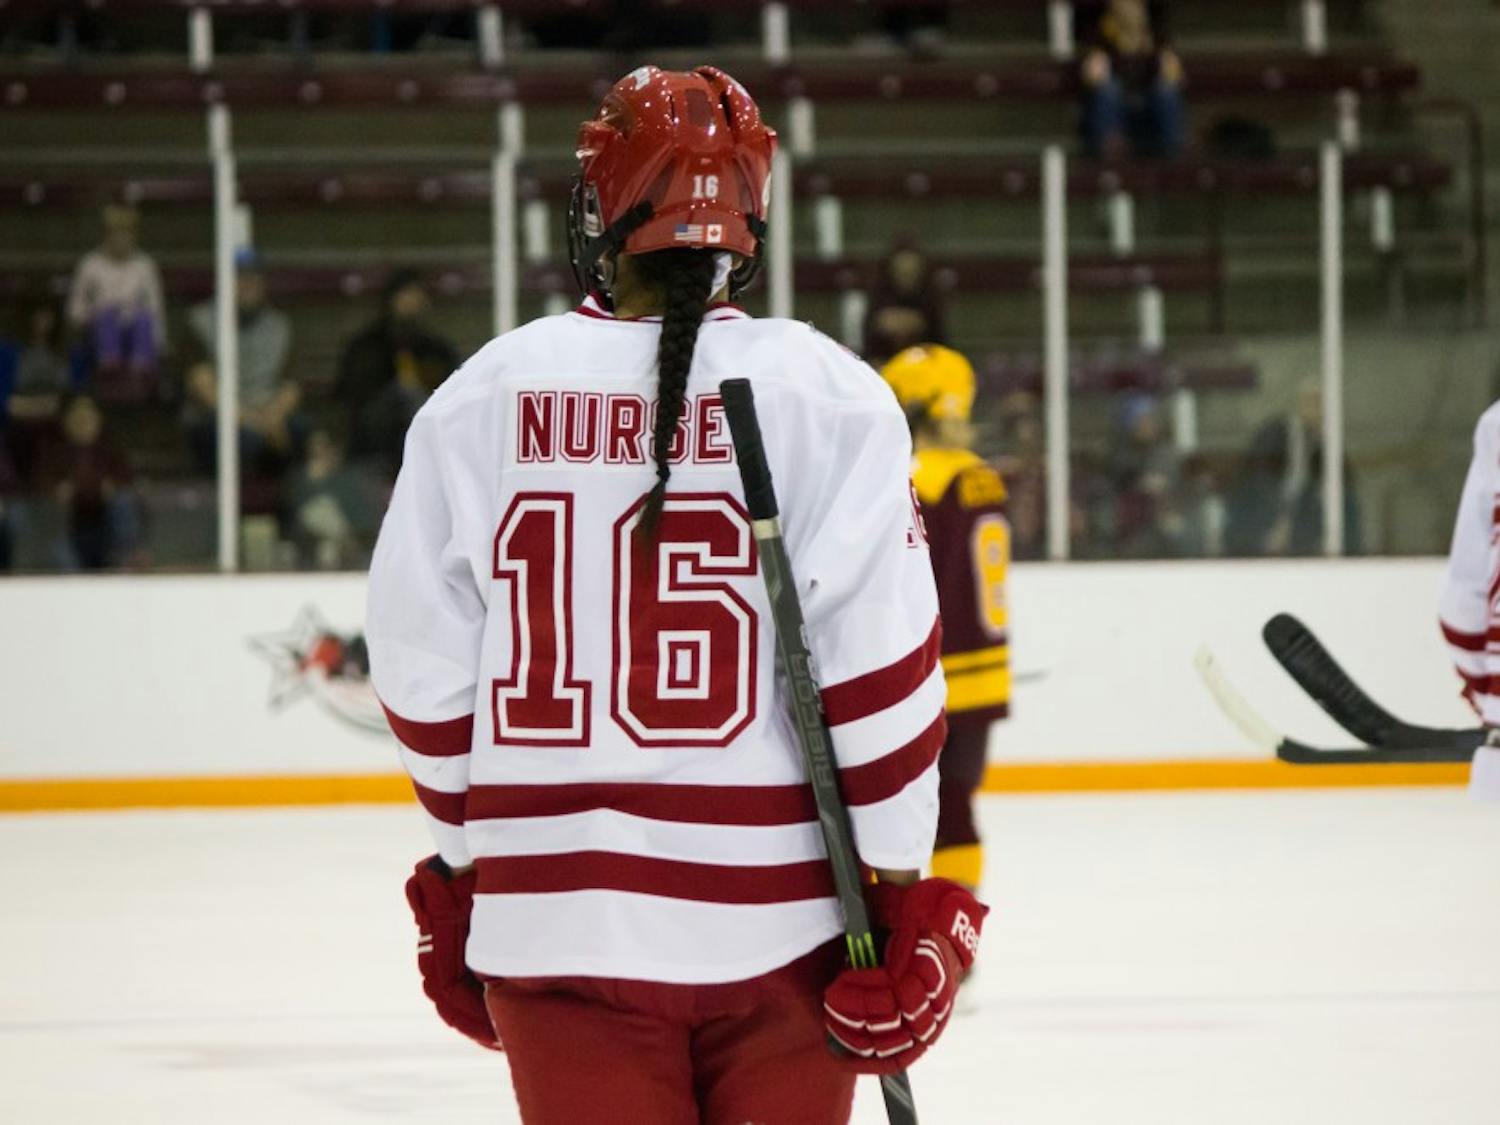 Sarah Nurse leveled the score in the third period to keep the Badgers alive in Minneapolis, Minn.